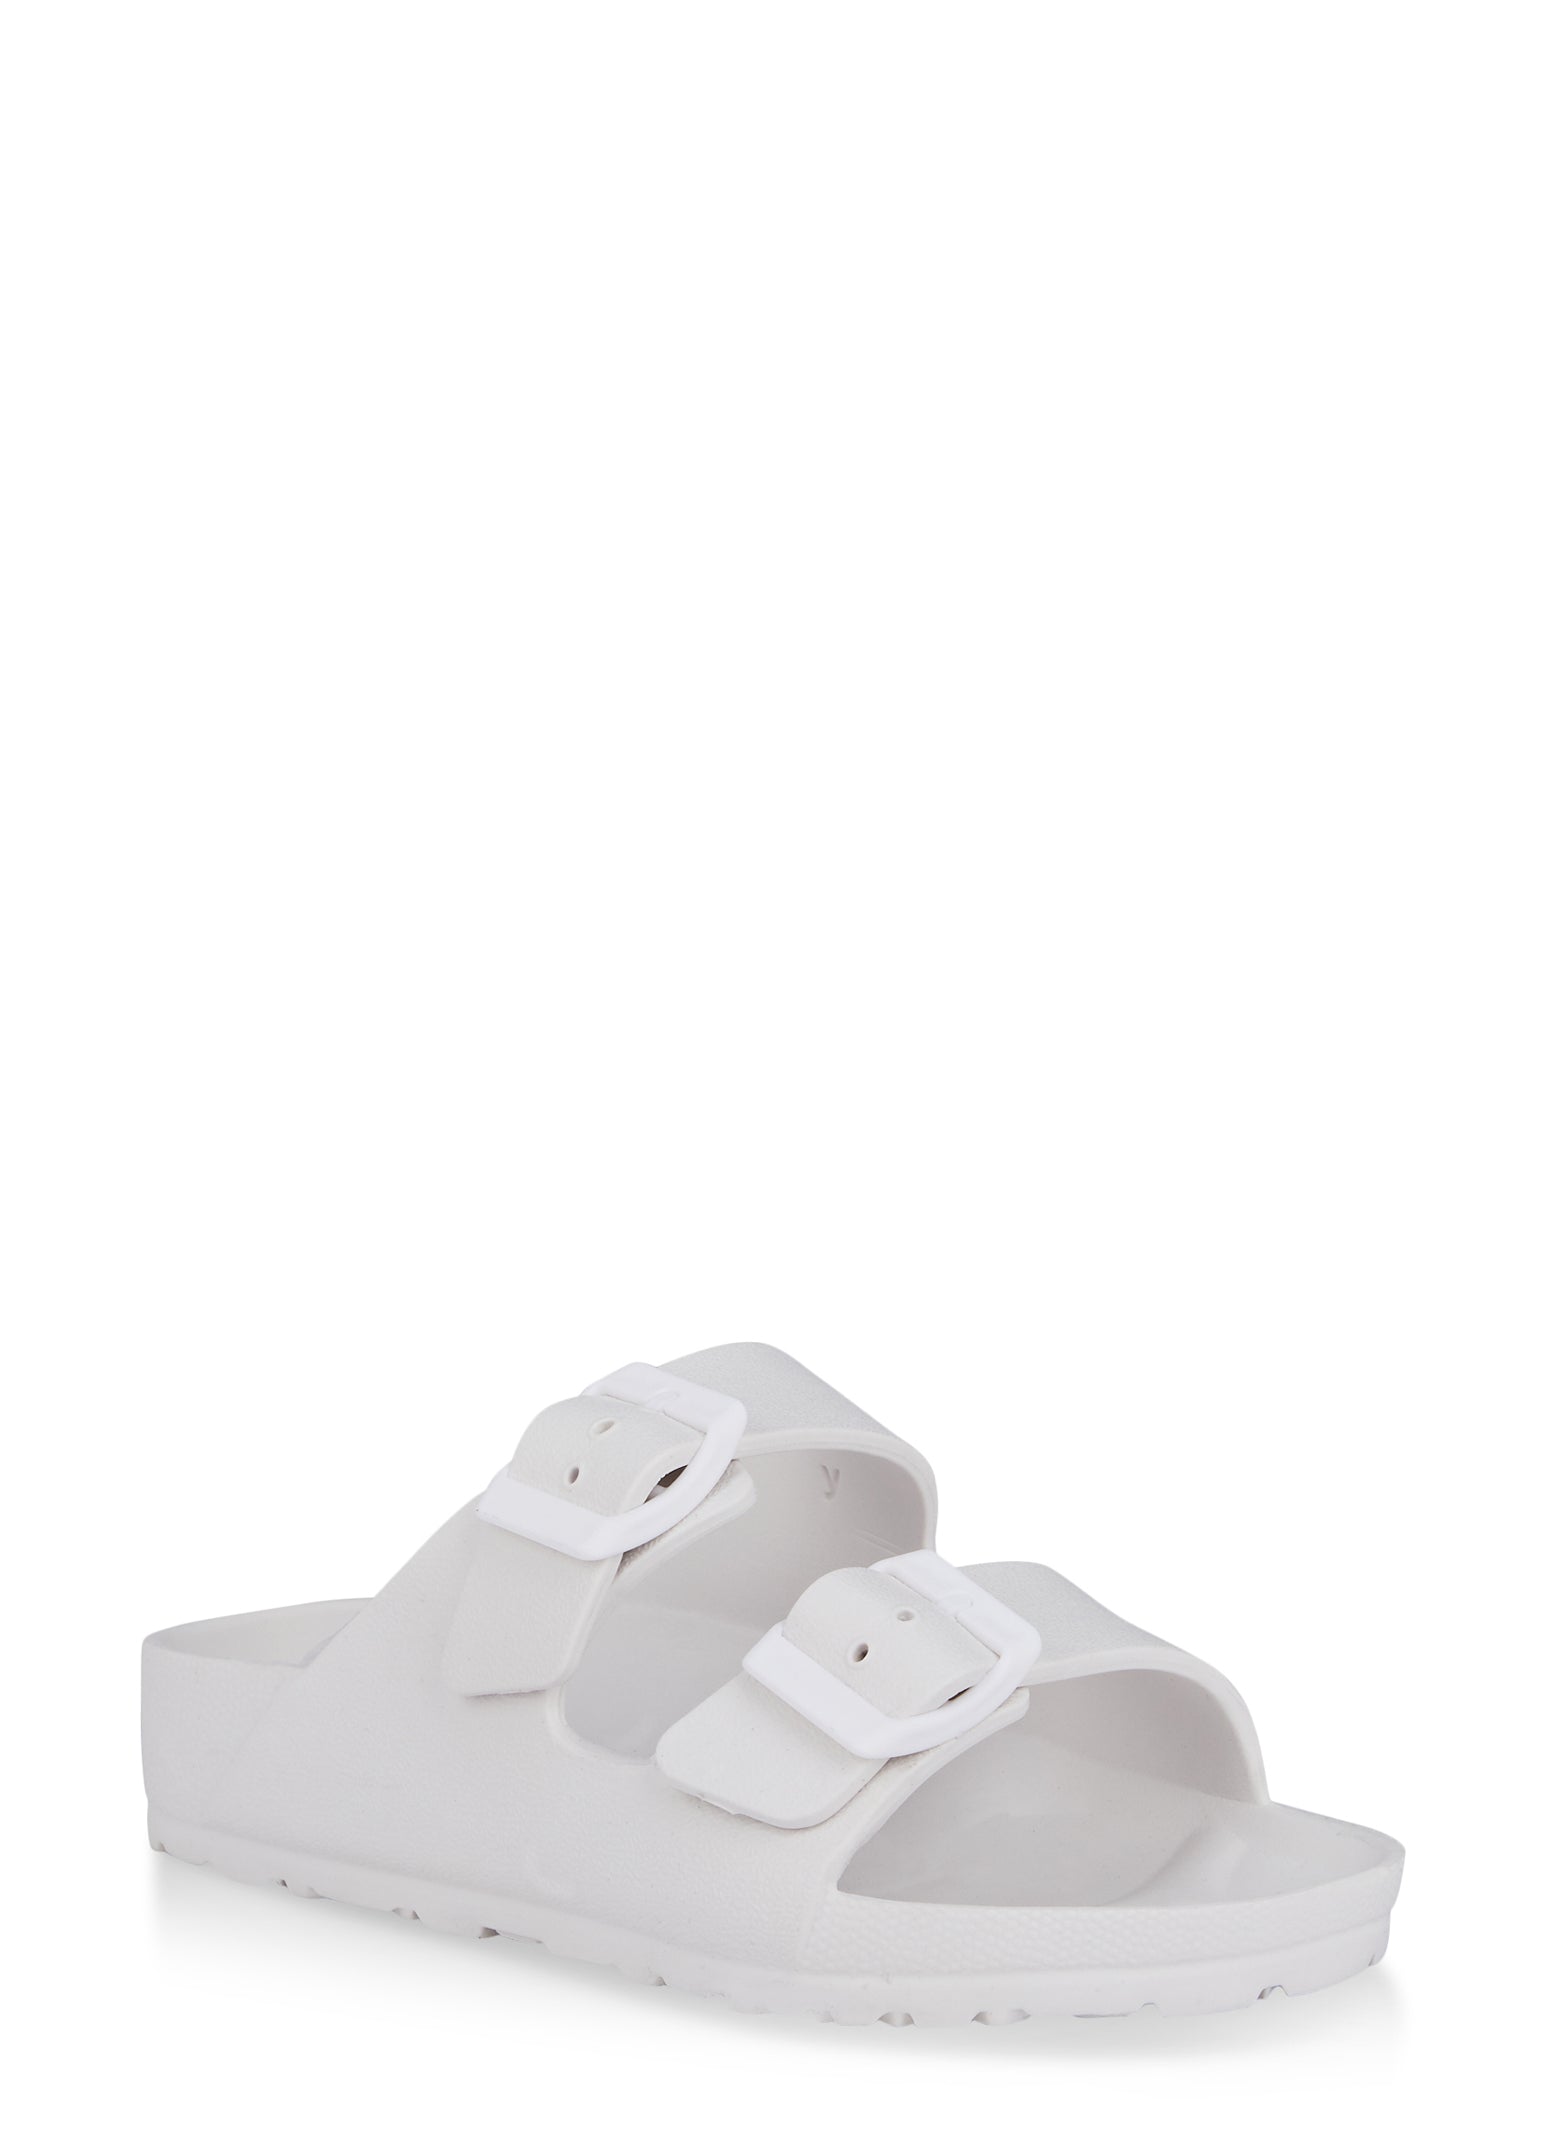 Girls Double Buckle Footbed Slide Sandals - White